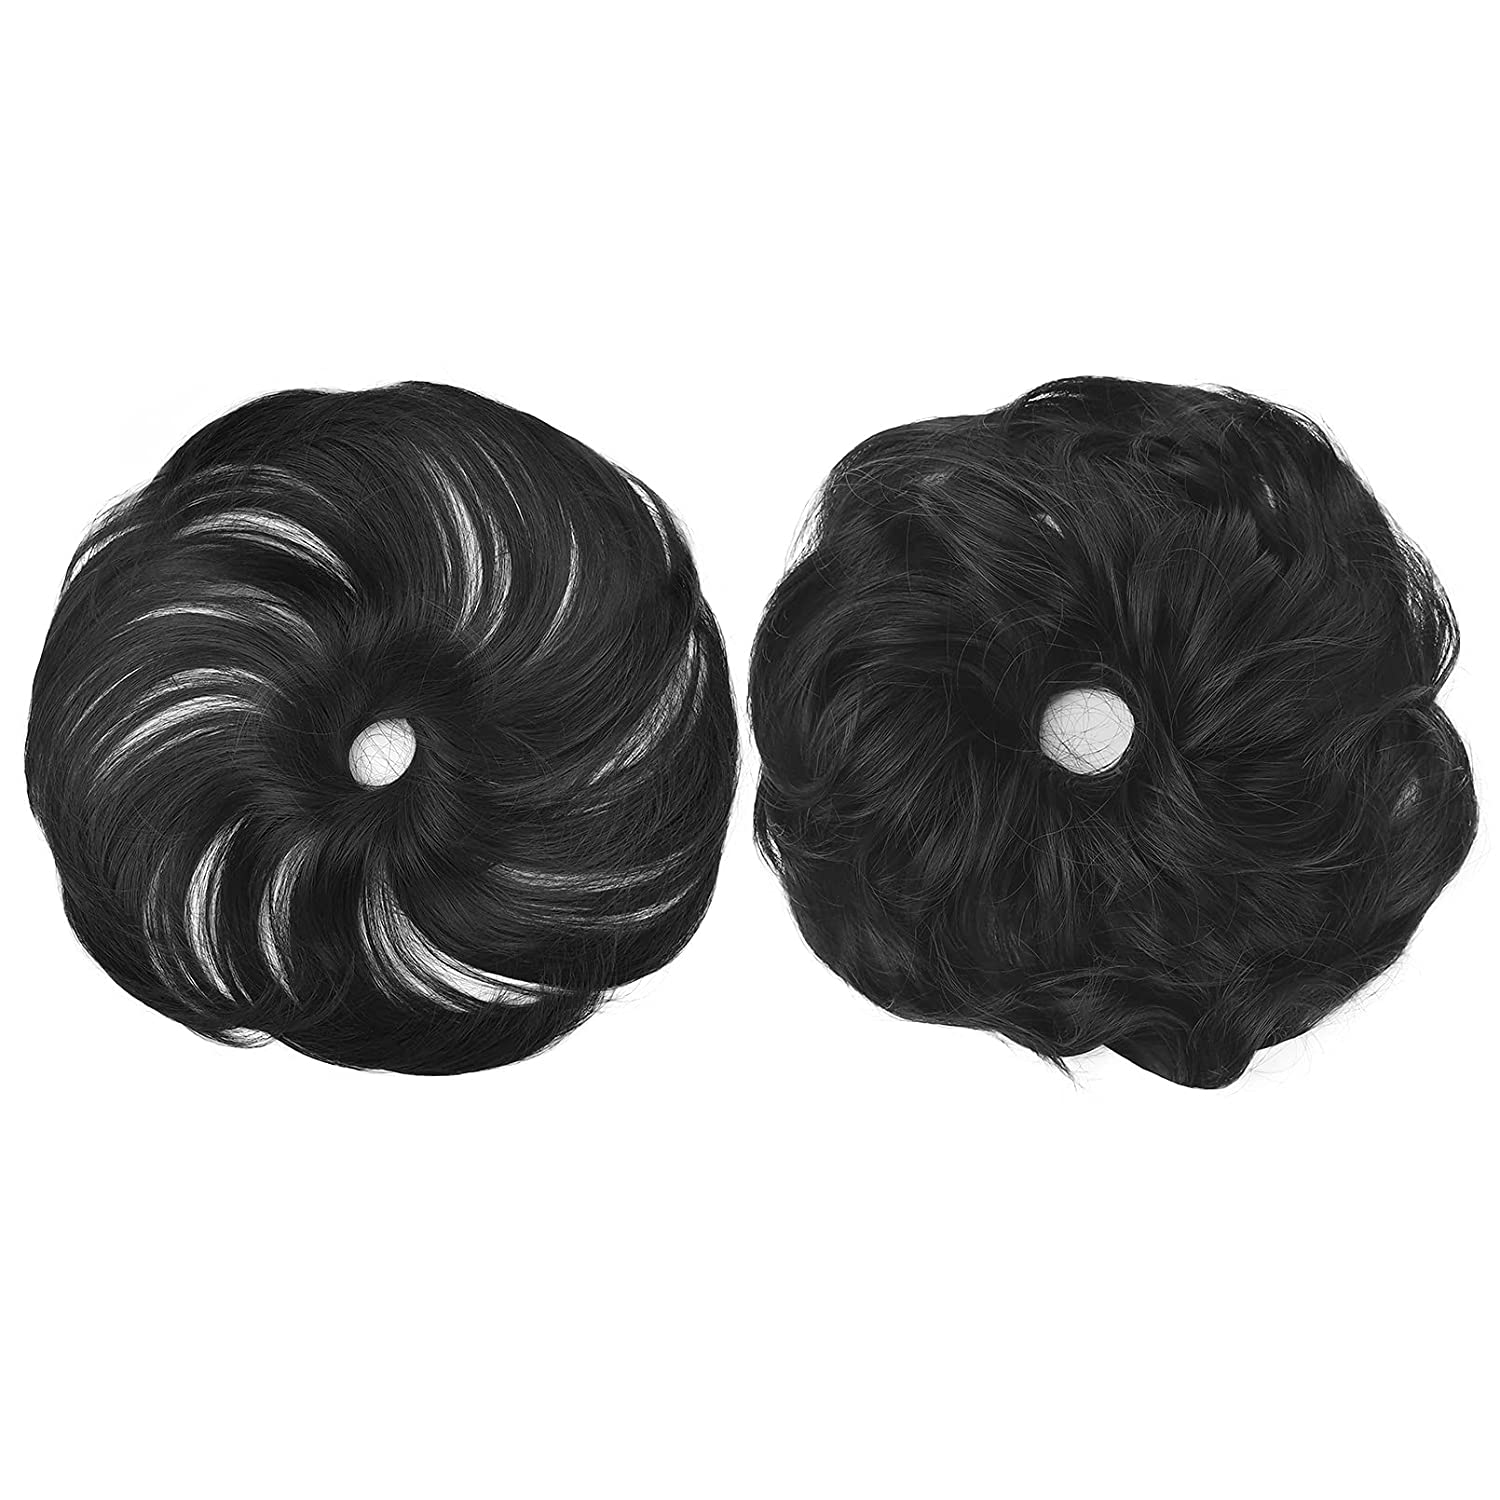 REECHO Thick 2PCS Updo Messy Hair Bun Curly Wavy Ponytail Extensions Hairpieces Hair Scrunchies Wraps Chignon for Women Girls